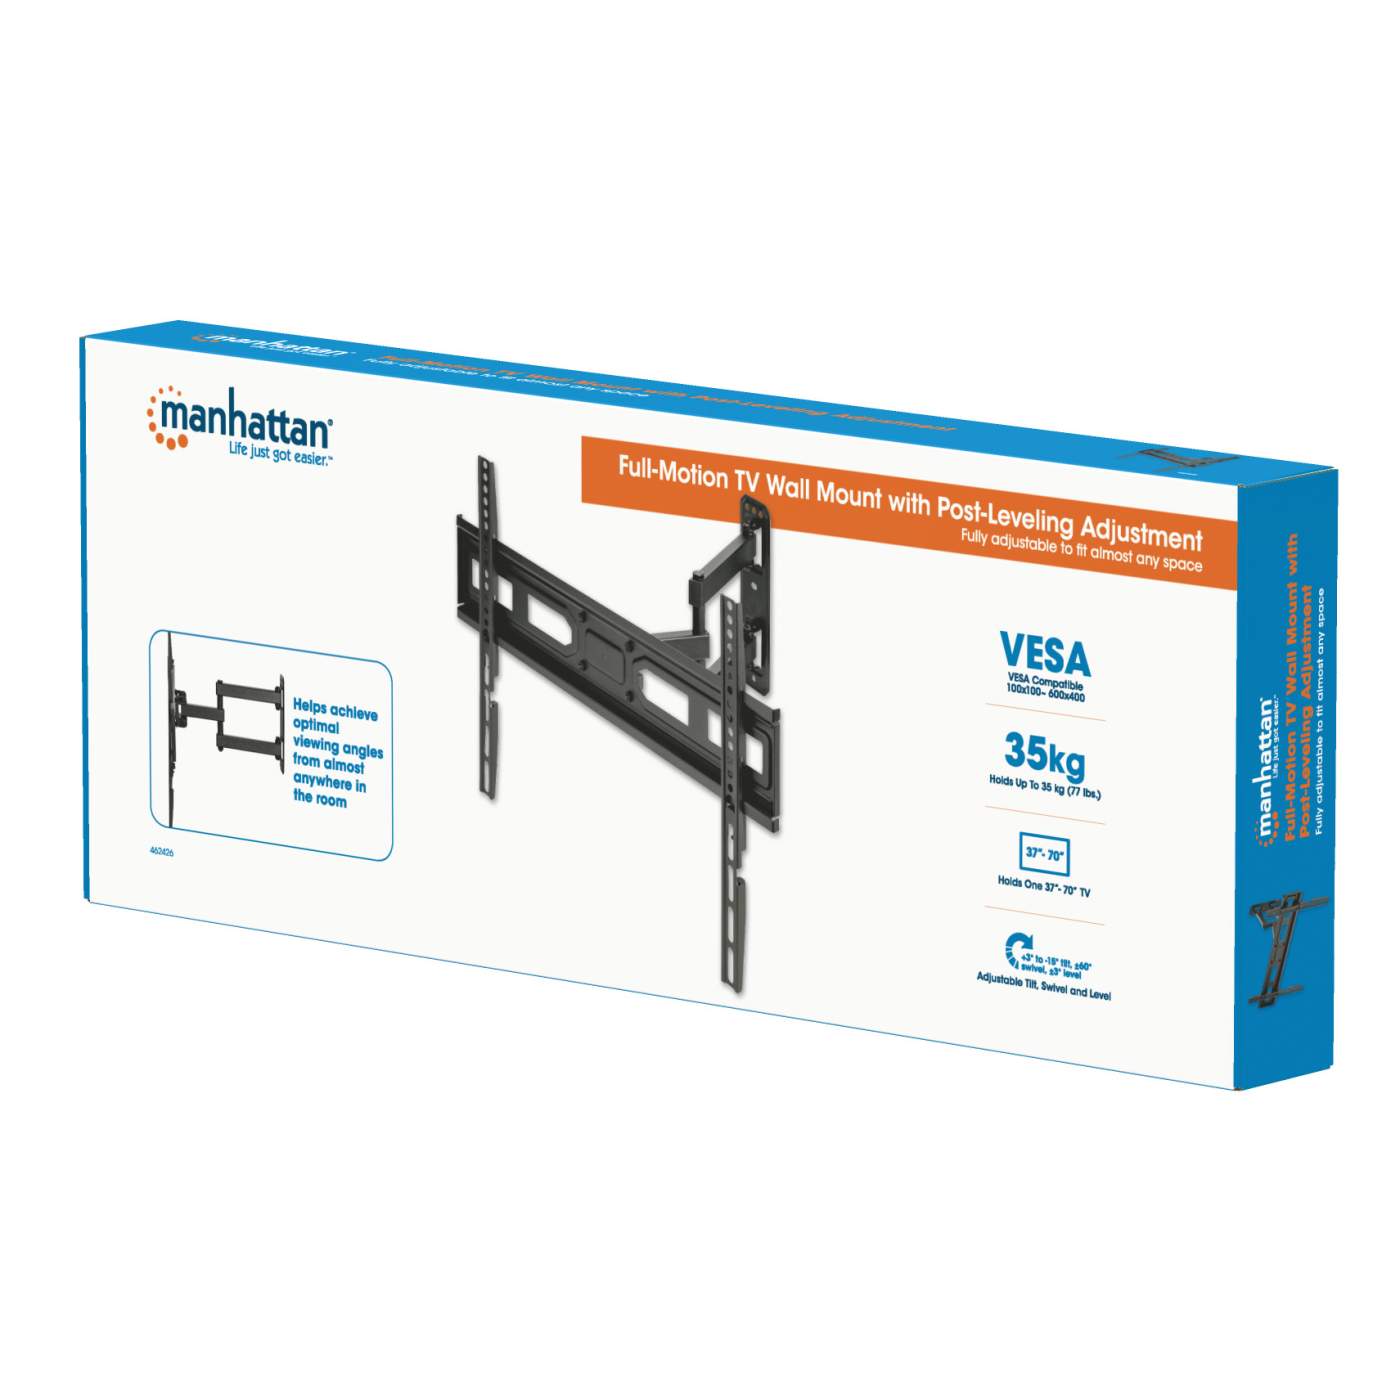 Full-Motion TV Wall Mount with Post-Leveling Adjustment Packaging Image 2